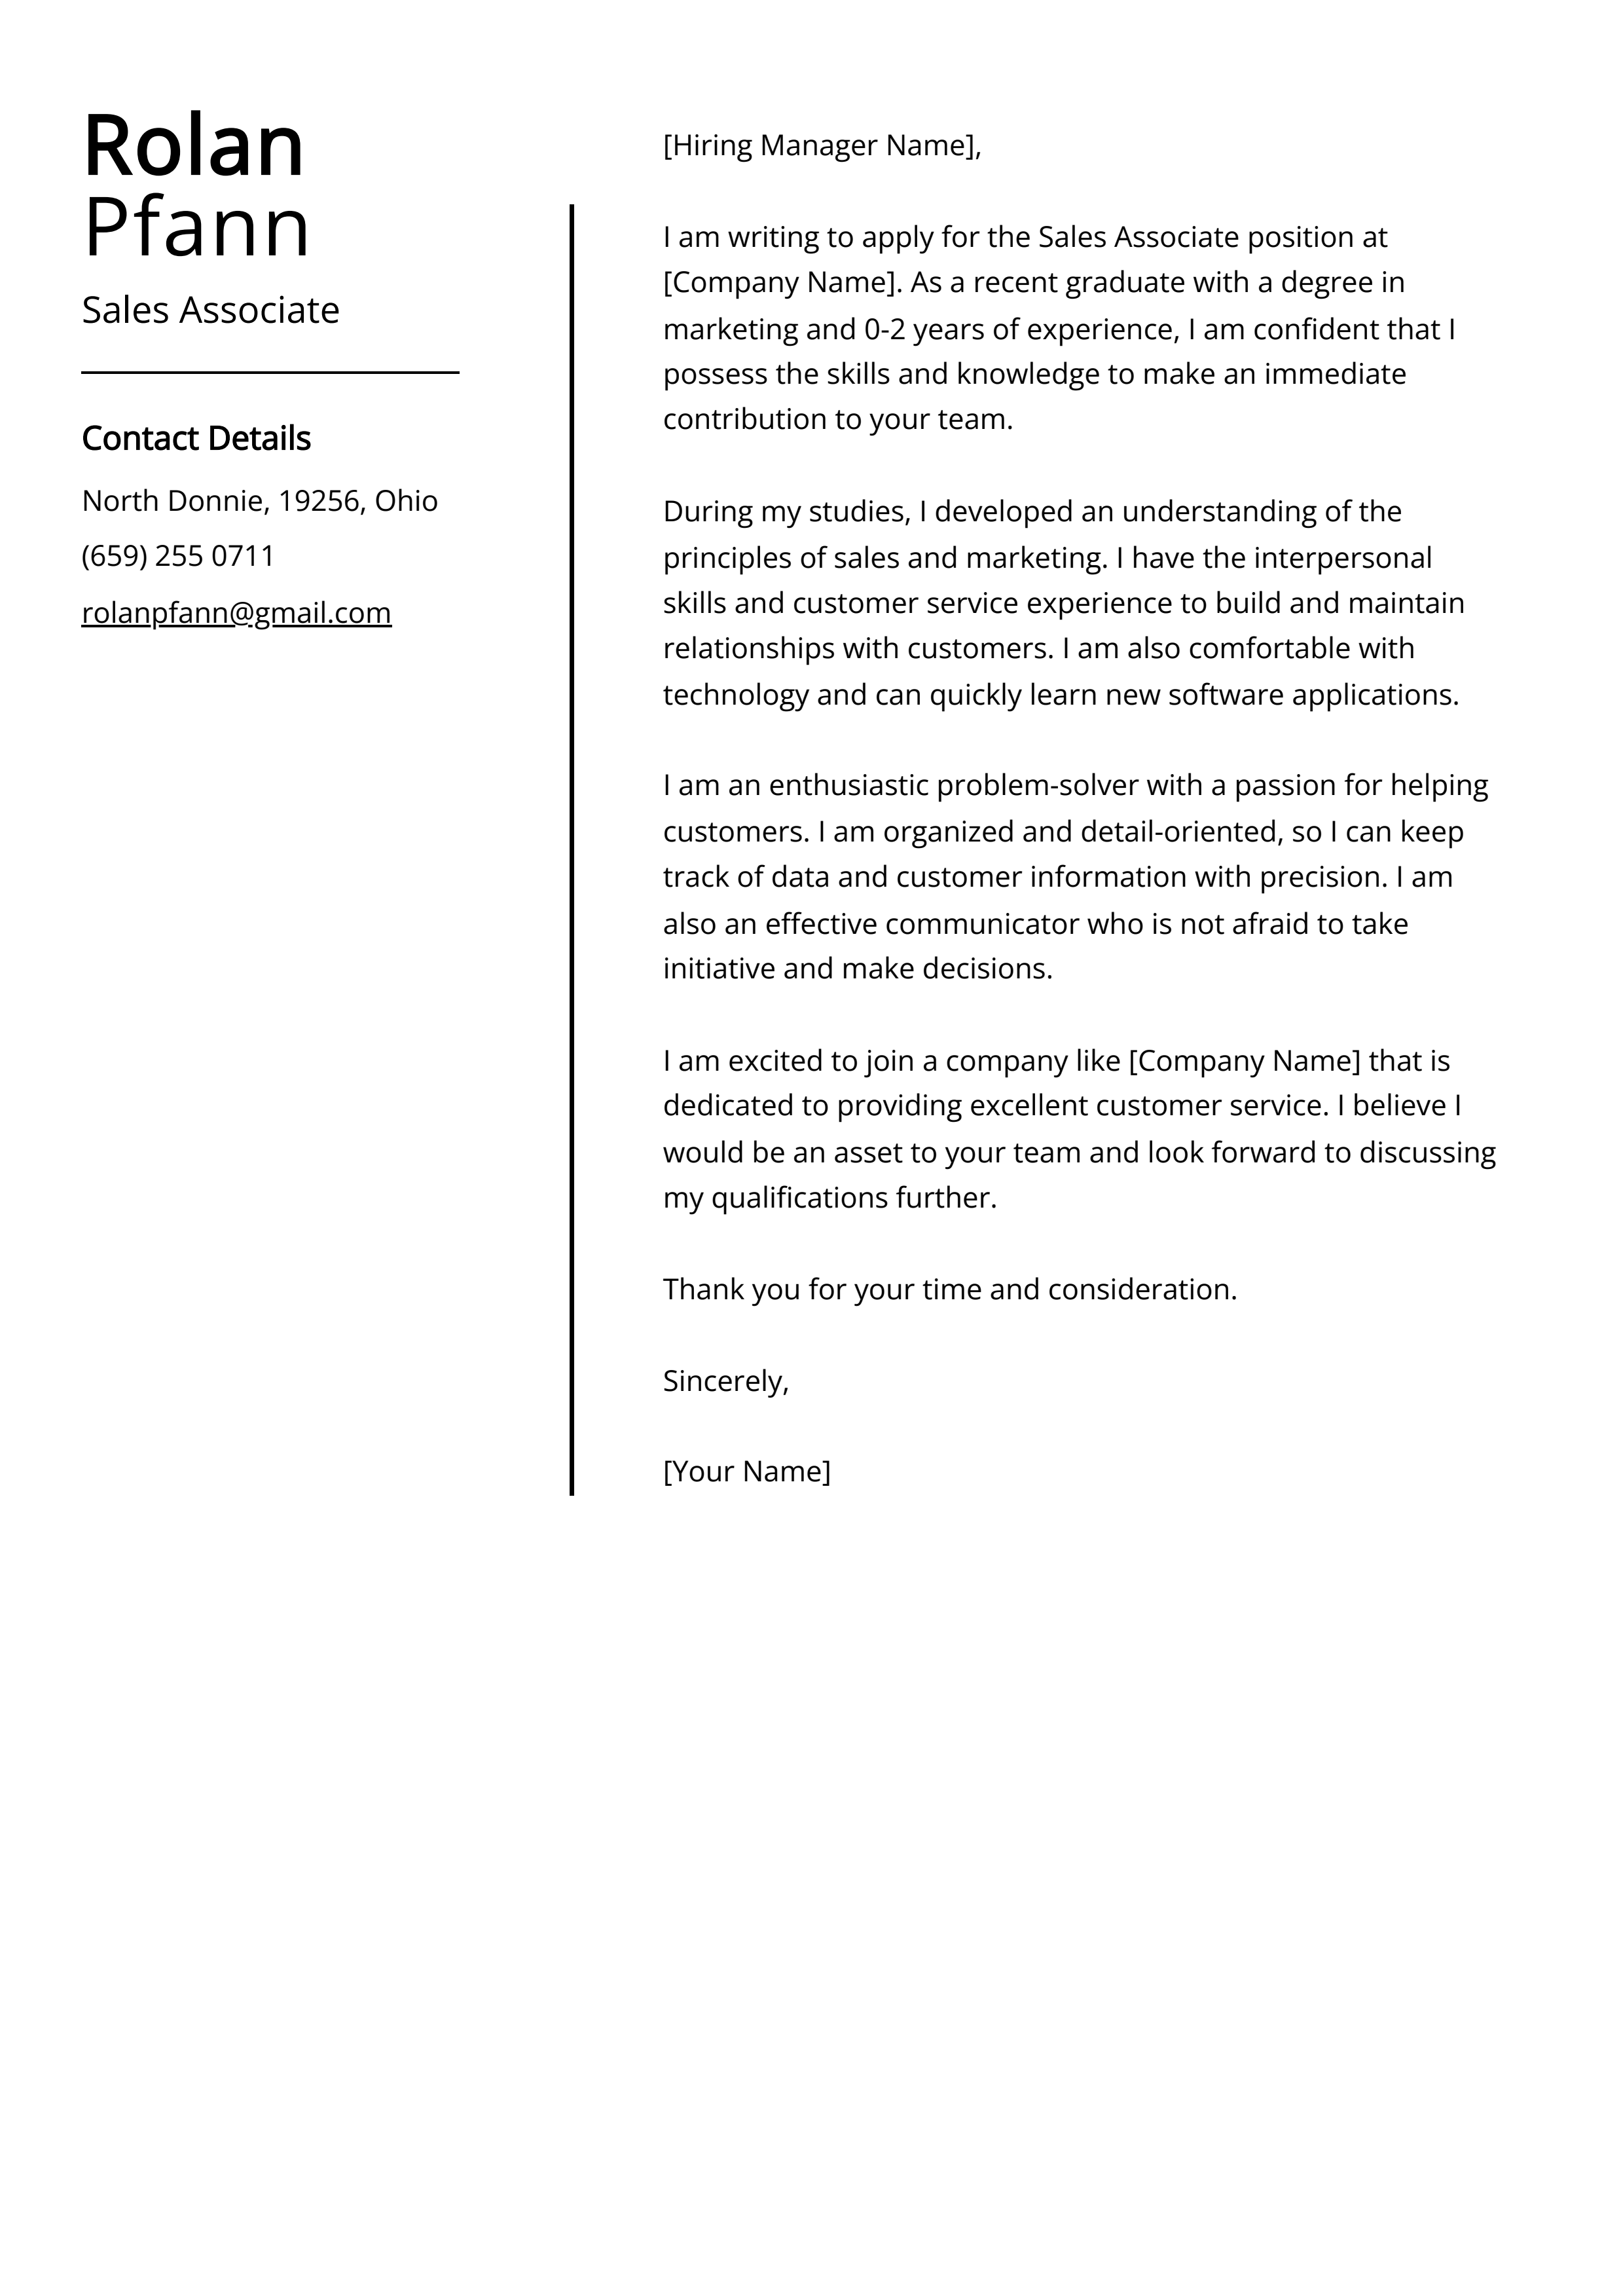 Sales Associate Cover Letter Example